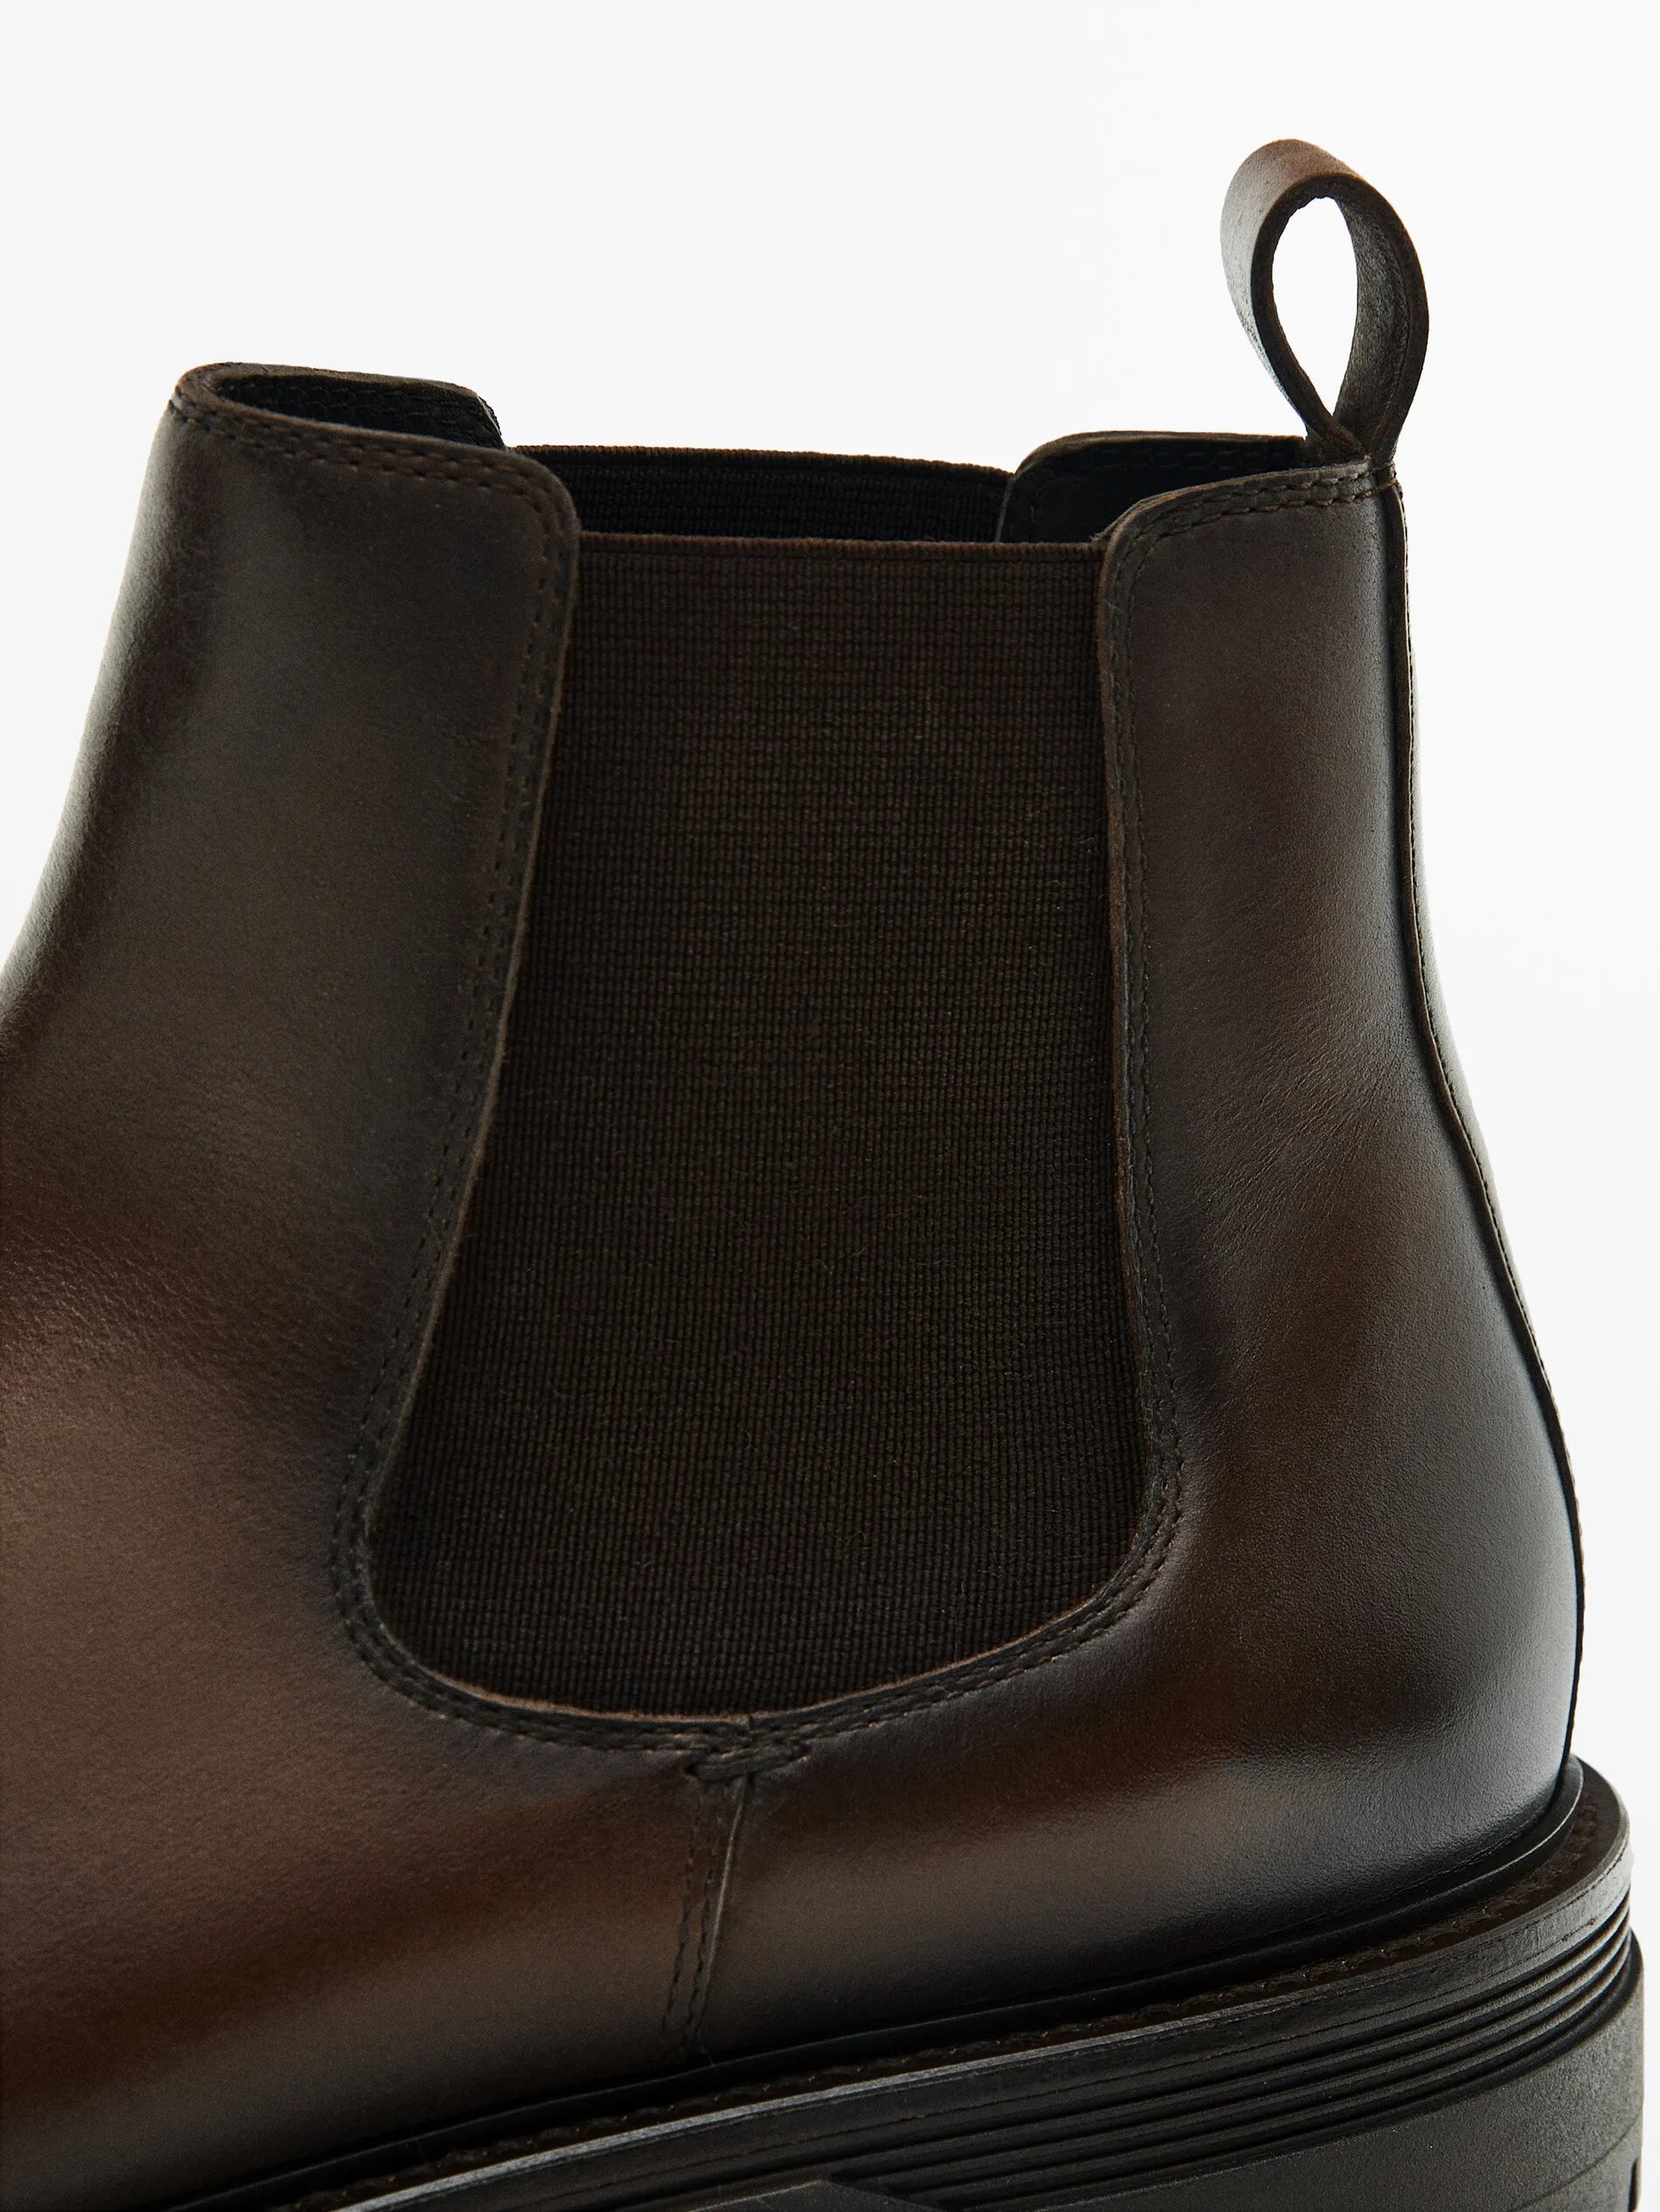 Massimo Dutti Men's Boots - 2083/051/700 Crafted for Refined Versatility